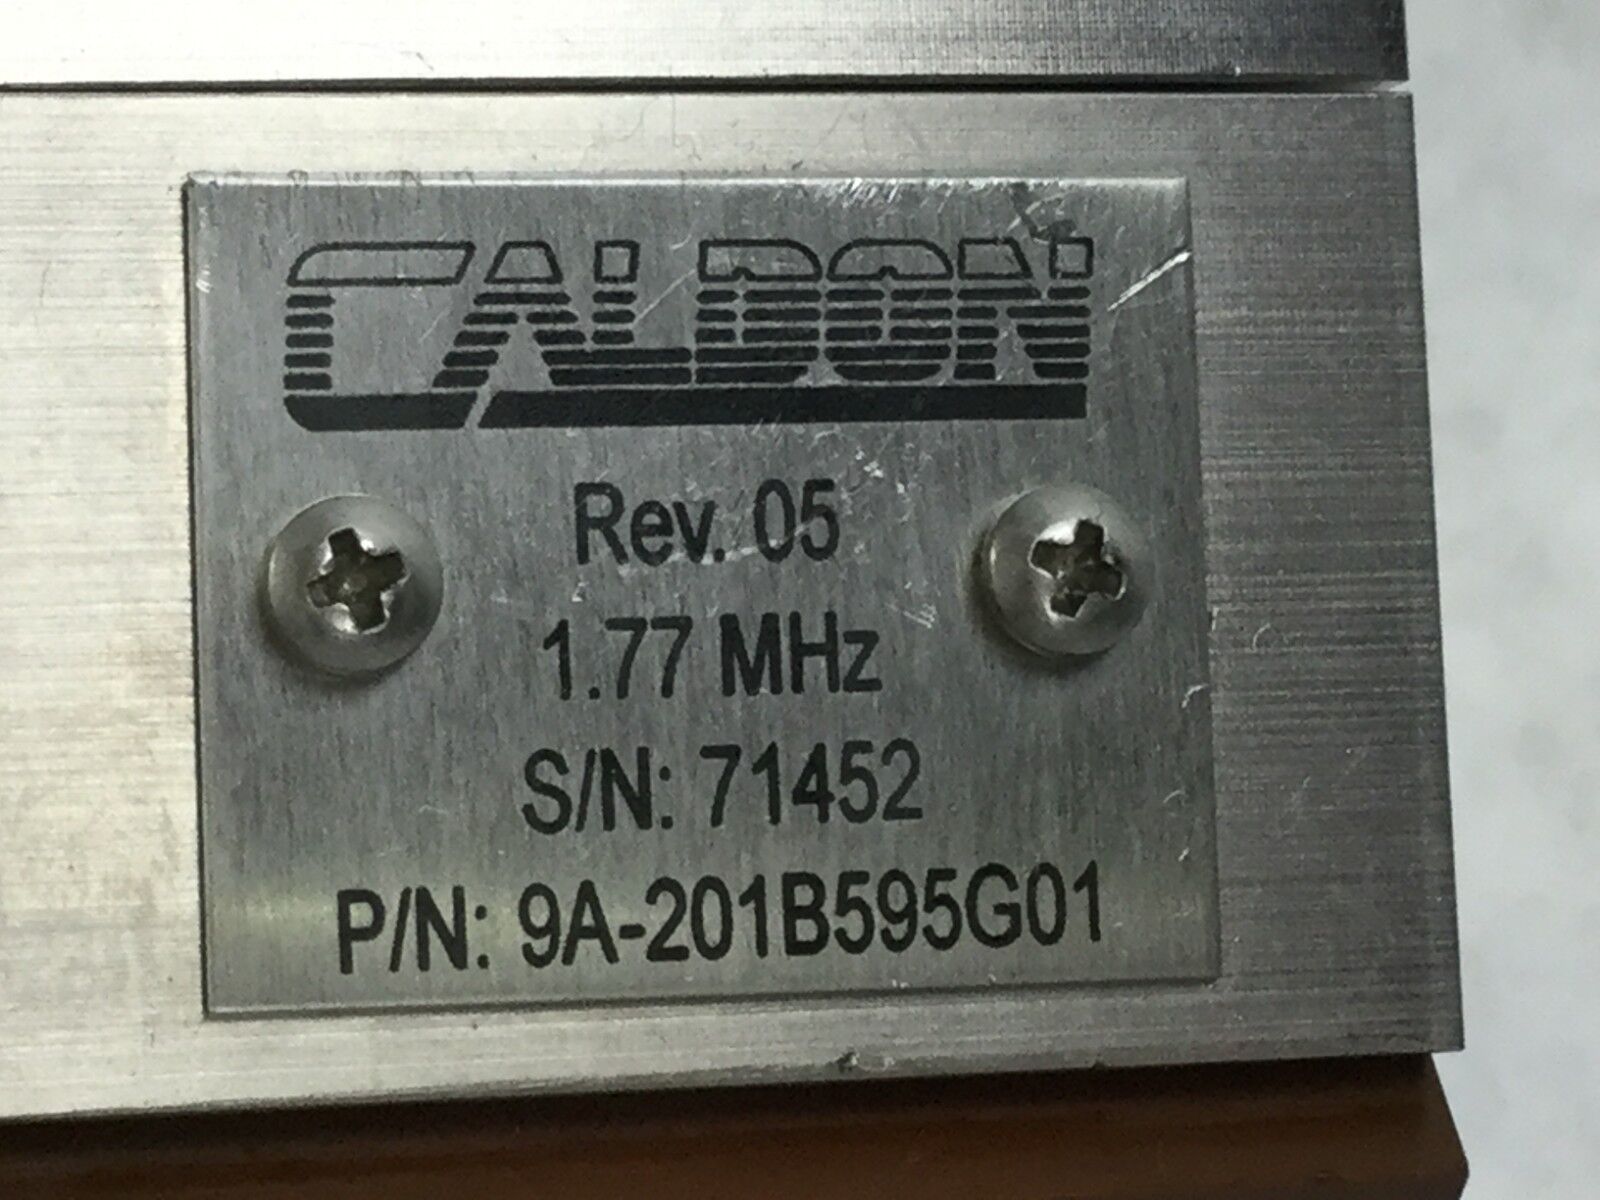 Caldon 9A-201B595G01 1.77 MHz  CW 7967  OW 38  HW .635  Untested